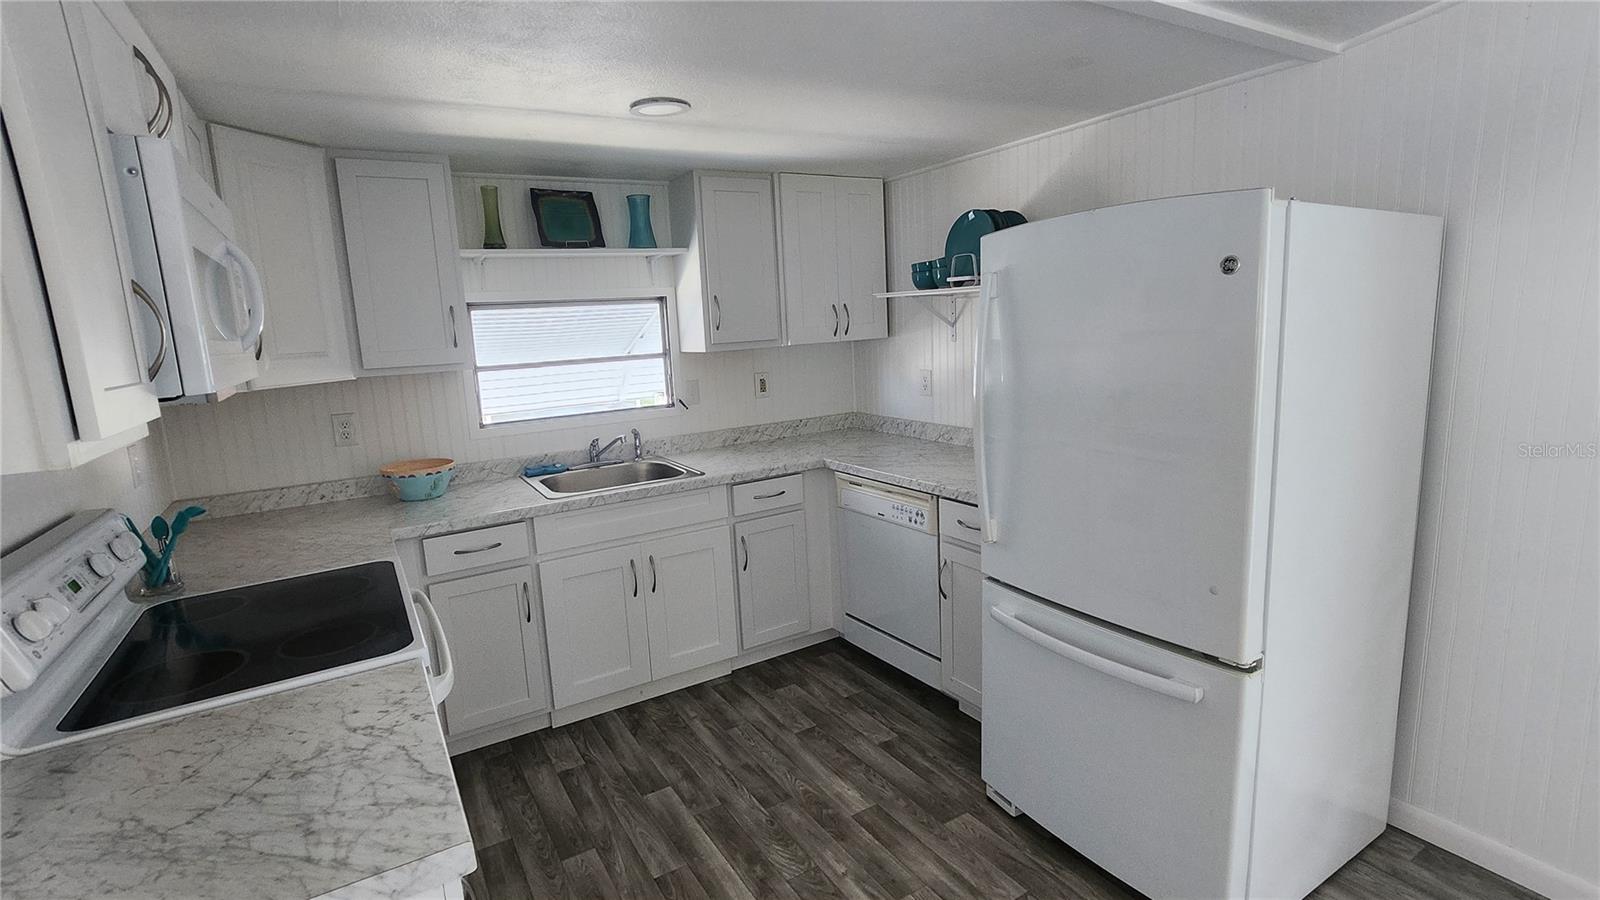 Bright and clean workable kitchen with over the stove built in microwave and new garbage disposal